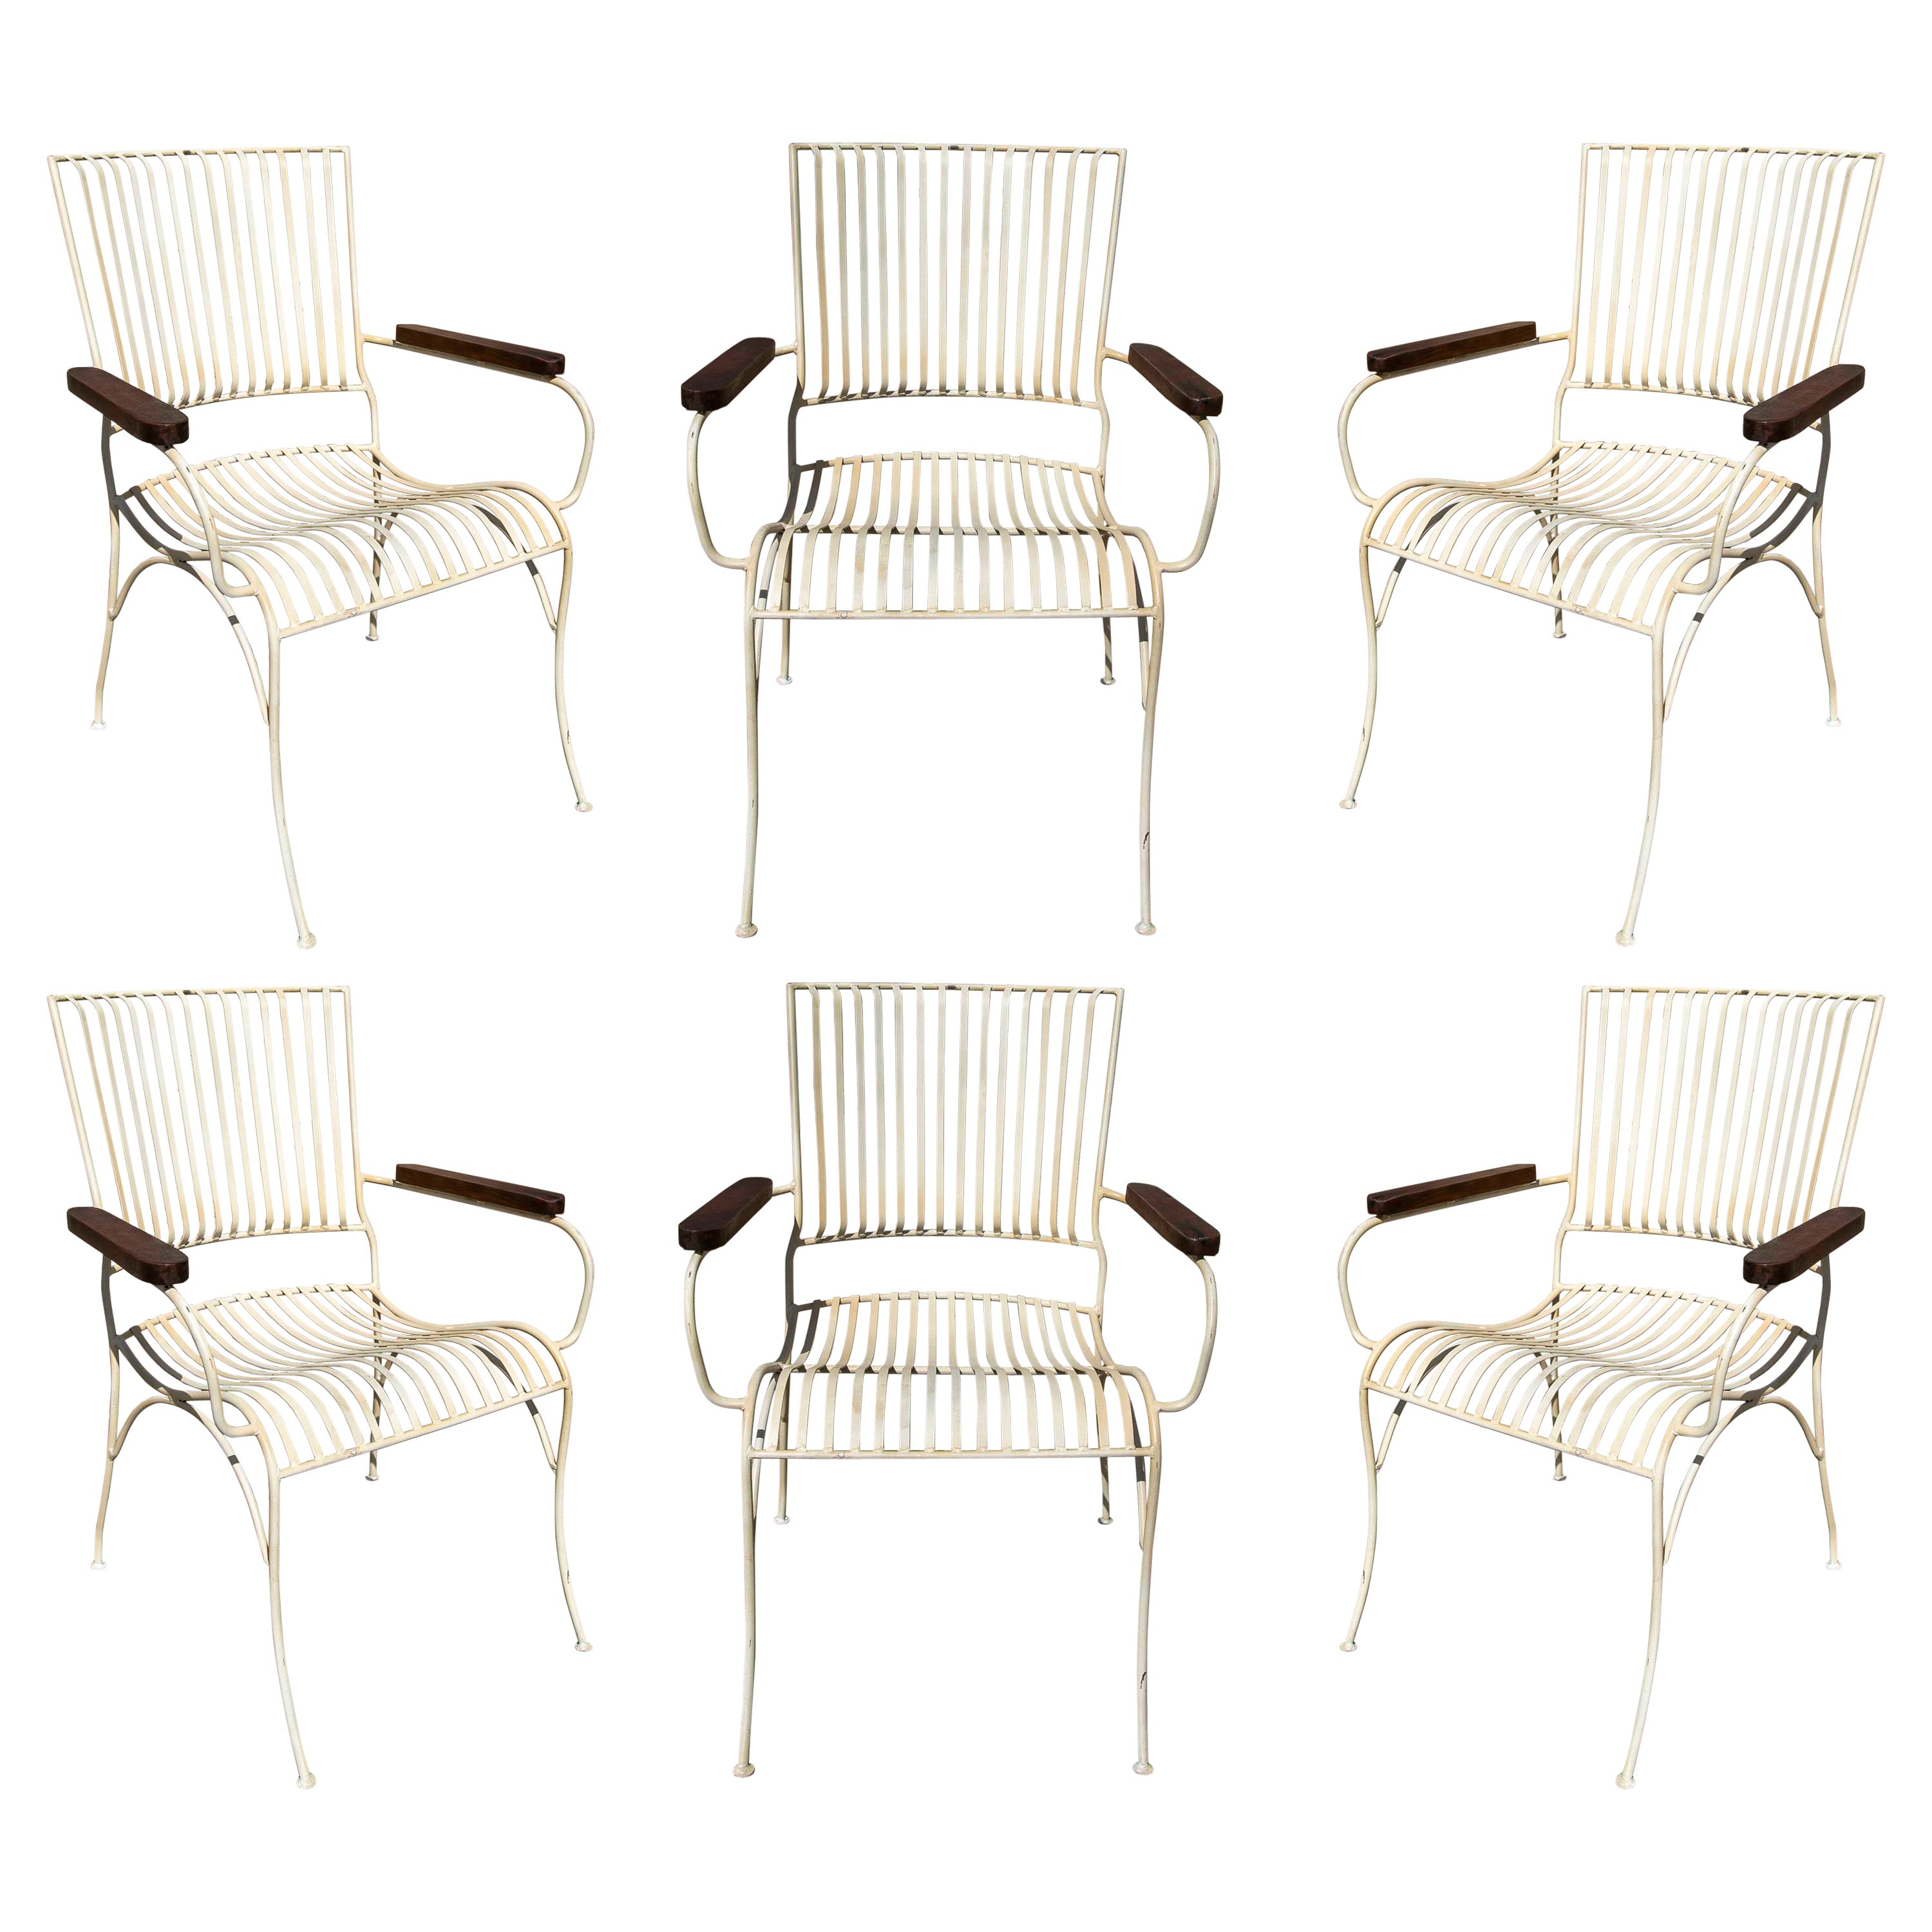 Set of Six Garden Chairs Made of Iron with Wooden Armrests  For Sale